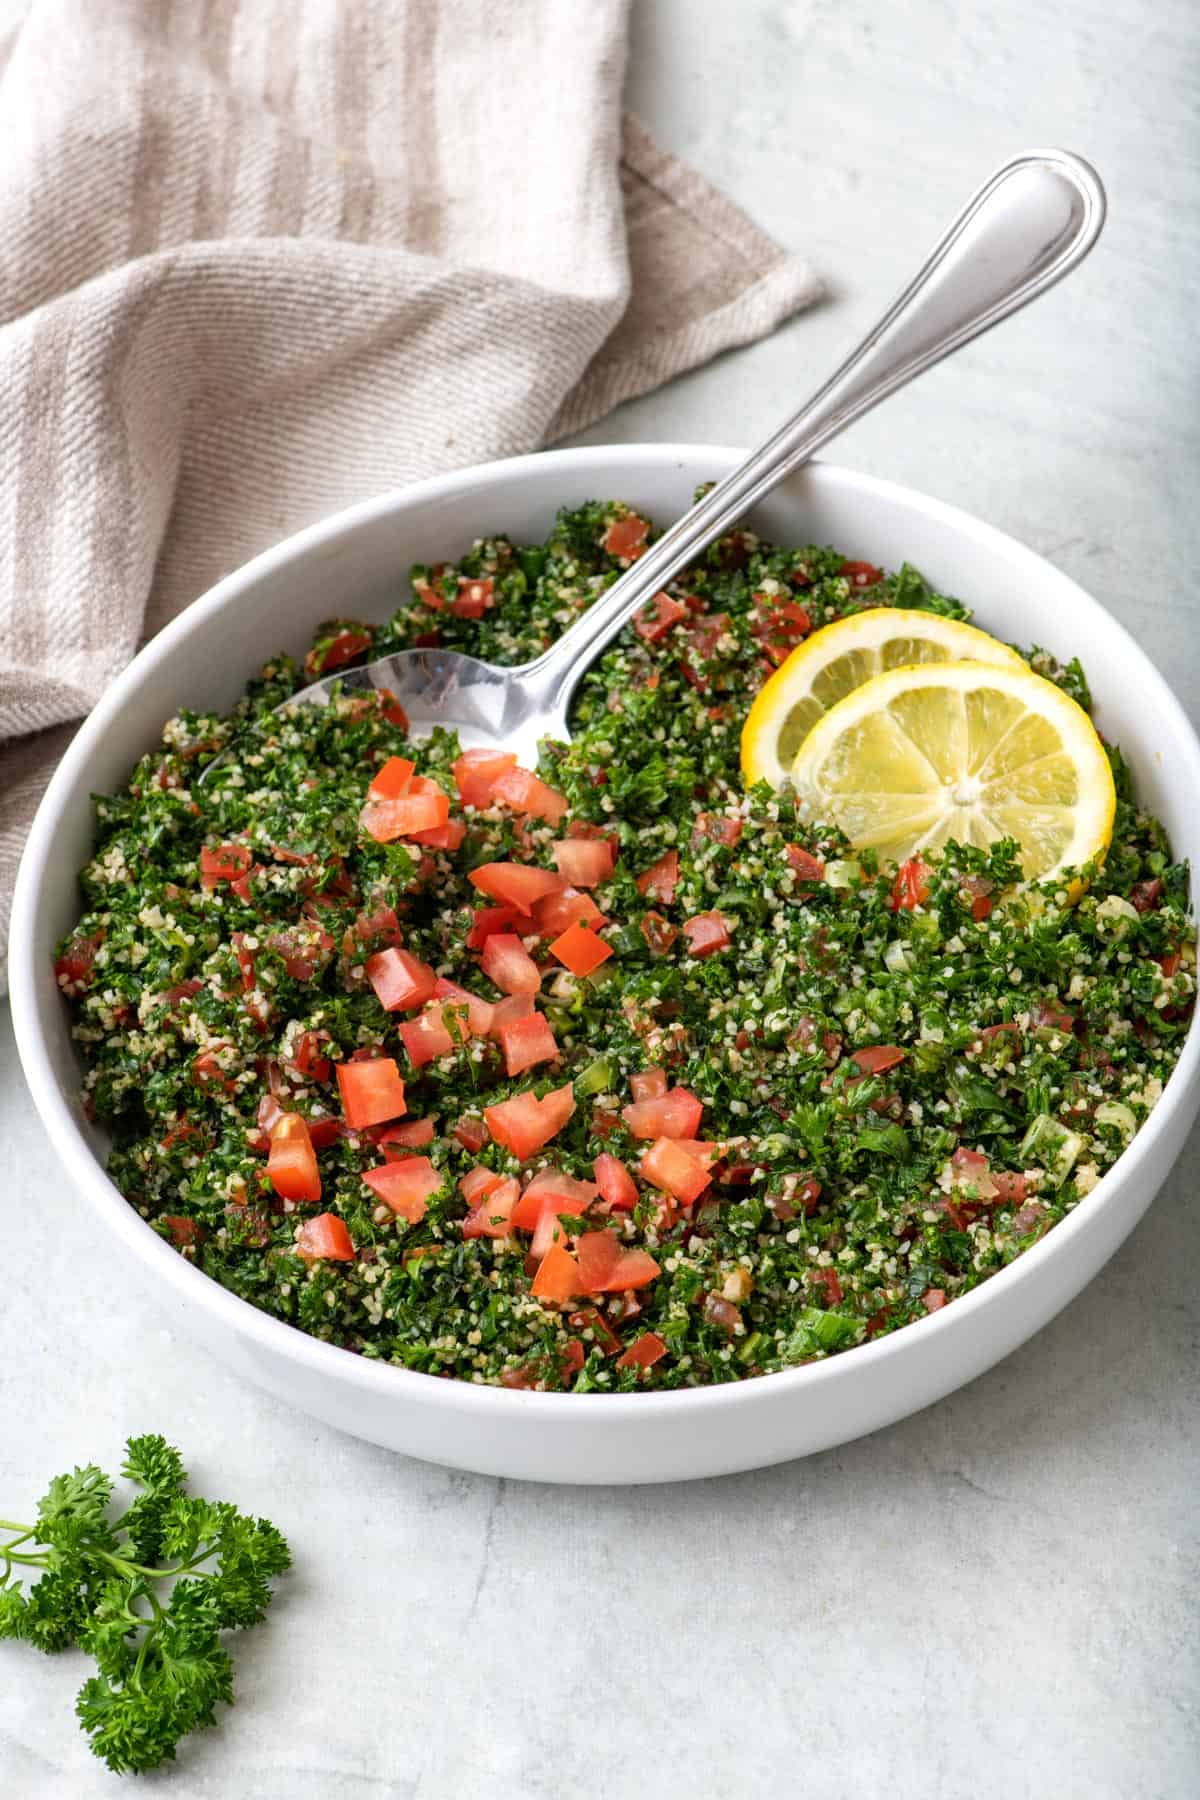 Tabbouleh salad in a large salad bowl with a spoon dipped in with a few lemon slices.